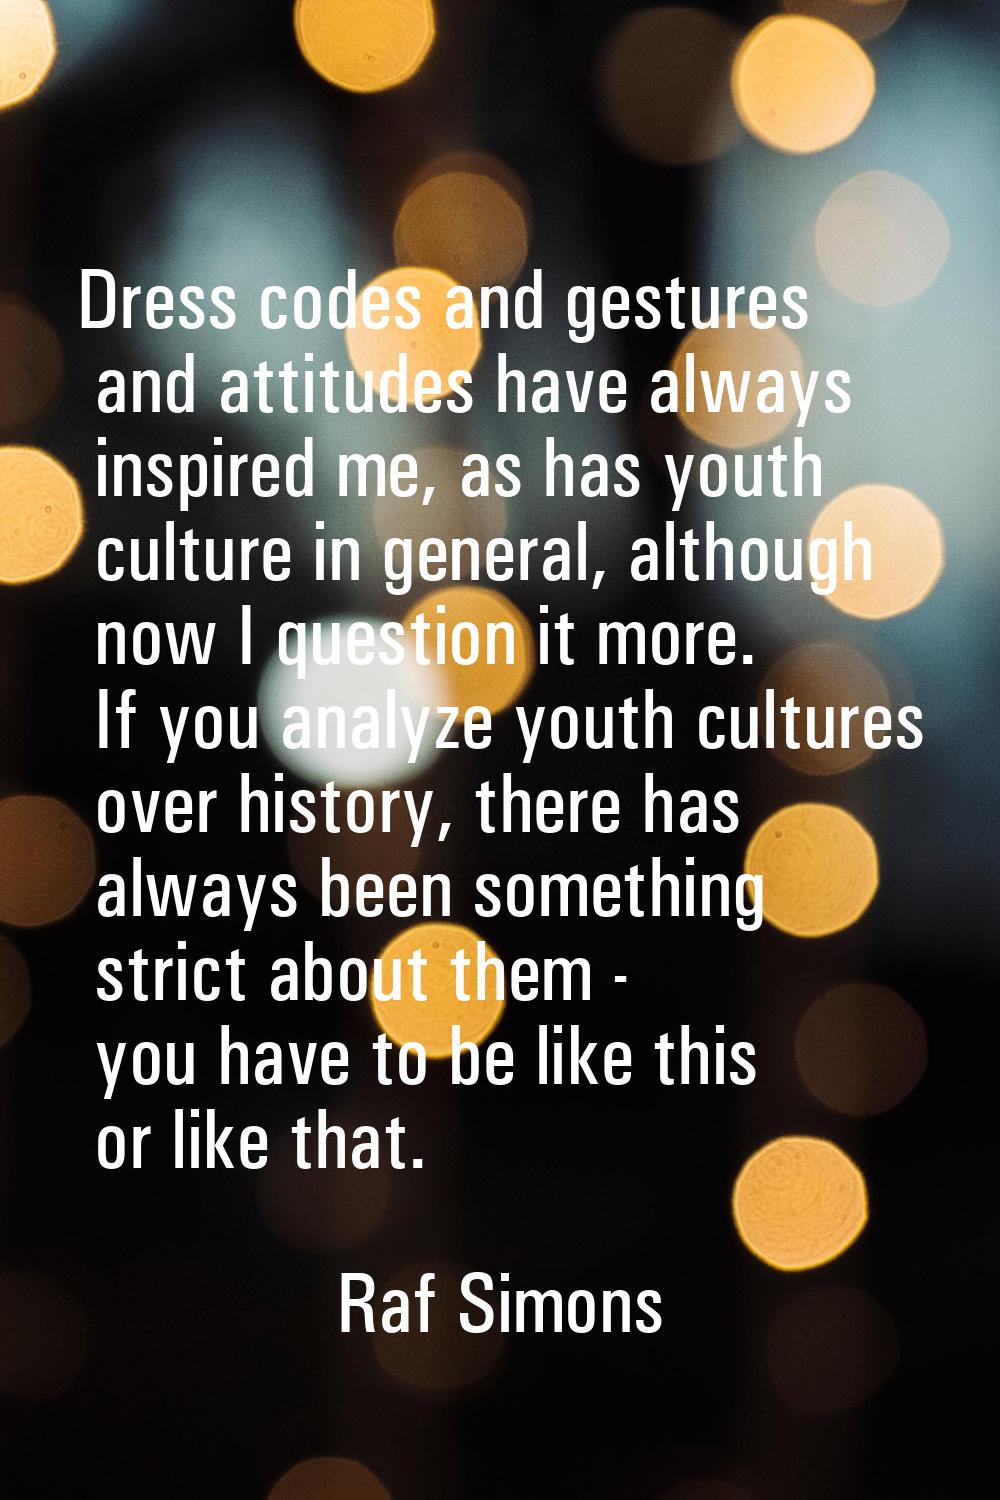 Dress codes and gestures and attitudes have always inspired me, as has youth culture in general, al